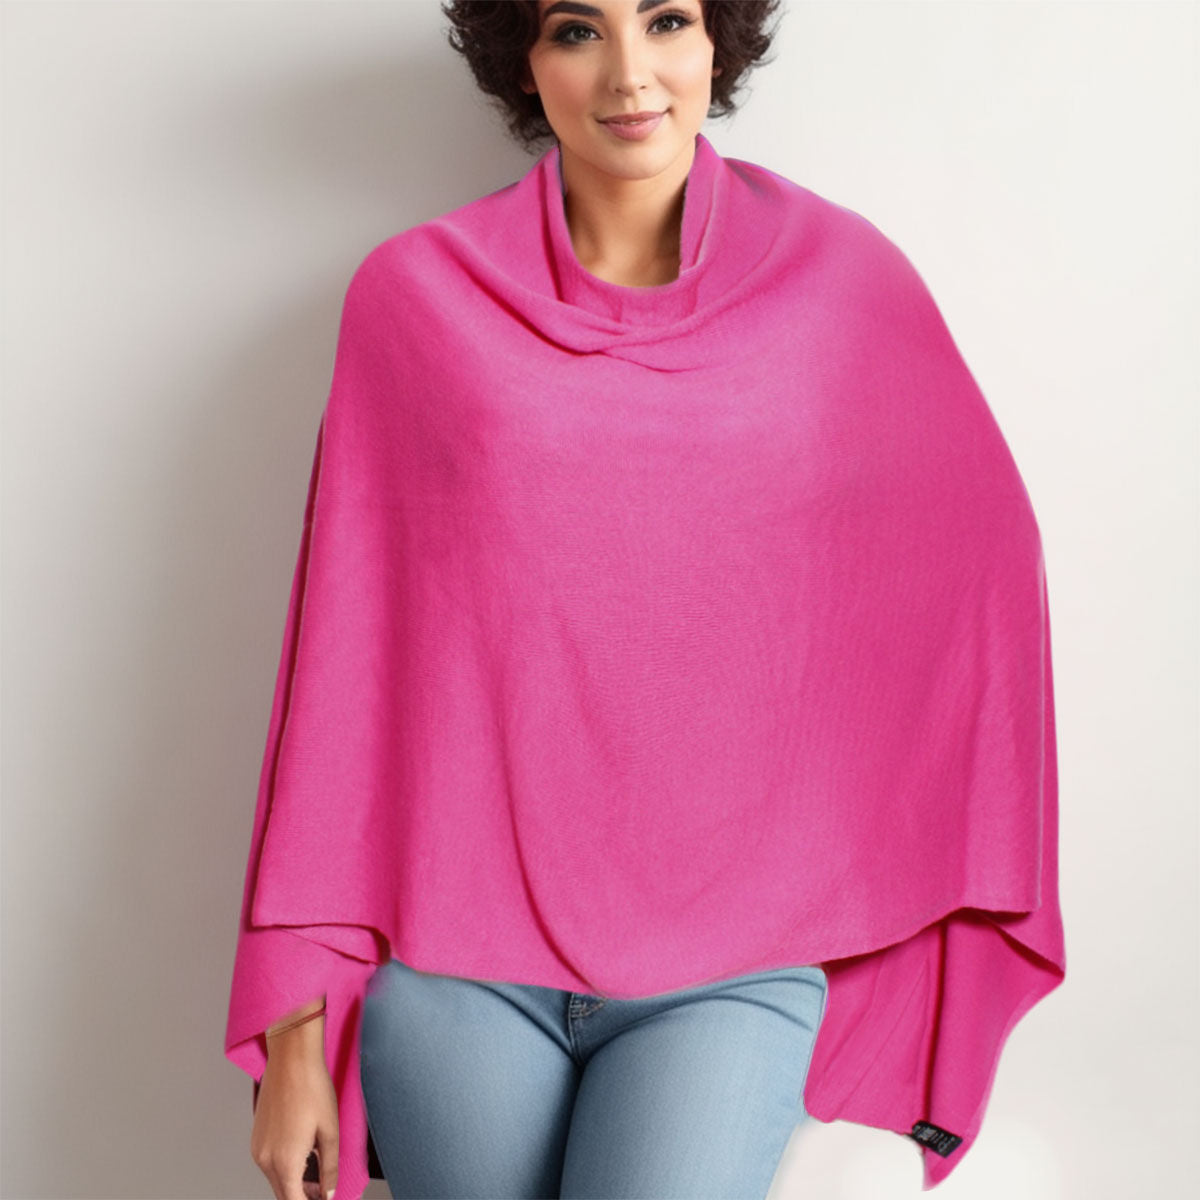 Scarf Poncho Pink Convertible Wrap for Women